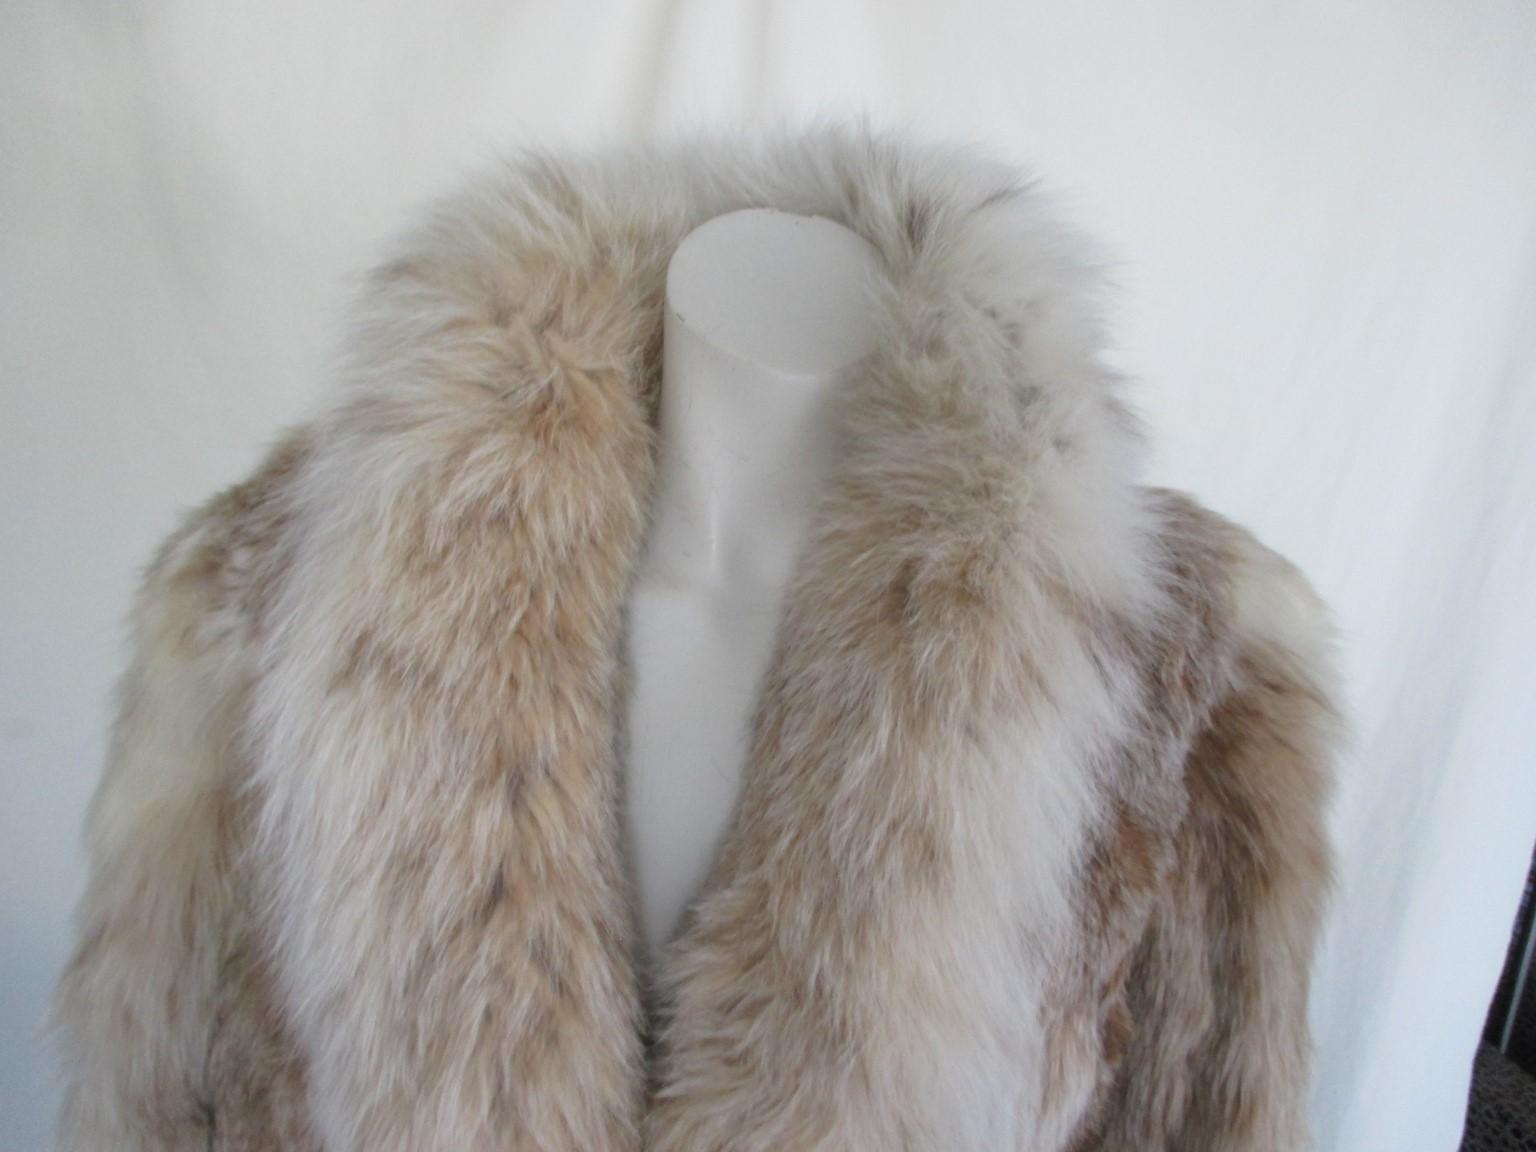 Beautiful high quality very stylish lynx full length coat

We offer more exclusive fur items, view our front store

Details:
With 2 side pockets,
1 inside pocket in lining and 3 closing hooks.
Fully lined with silk
The belt on picture is not